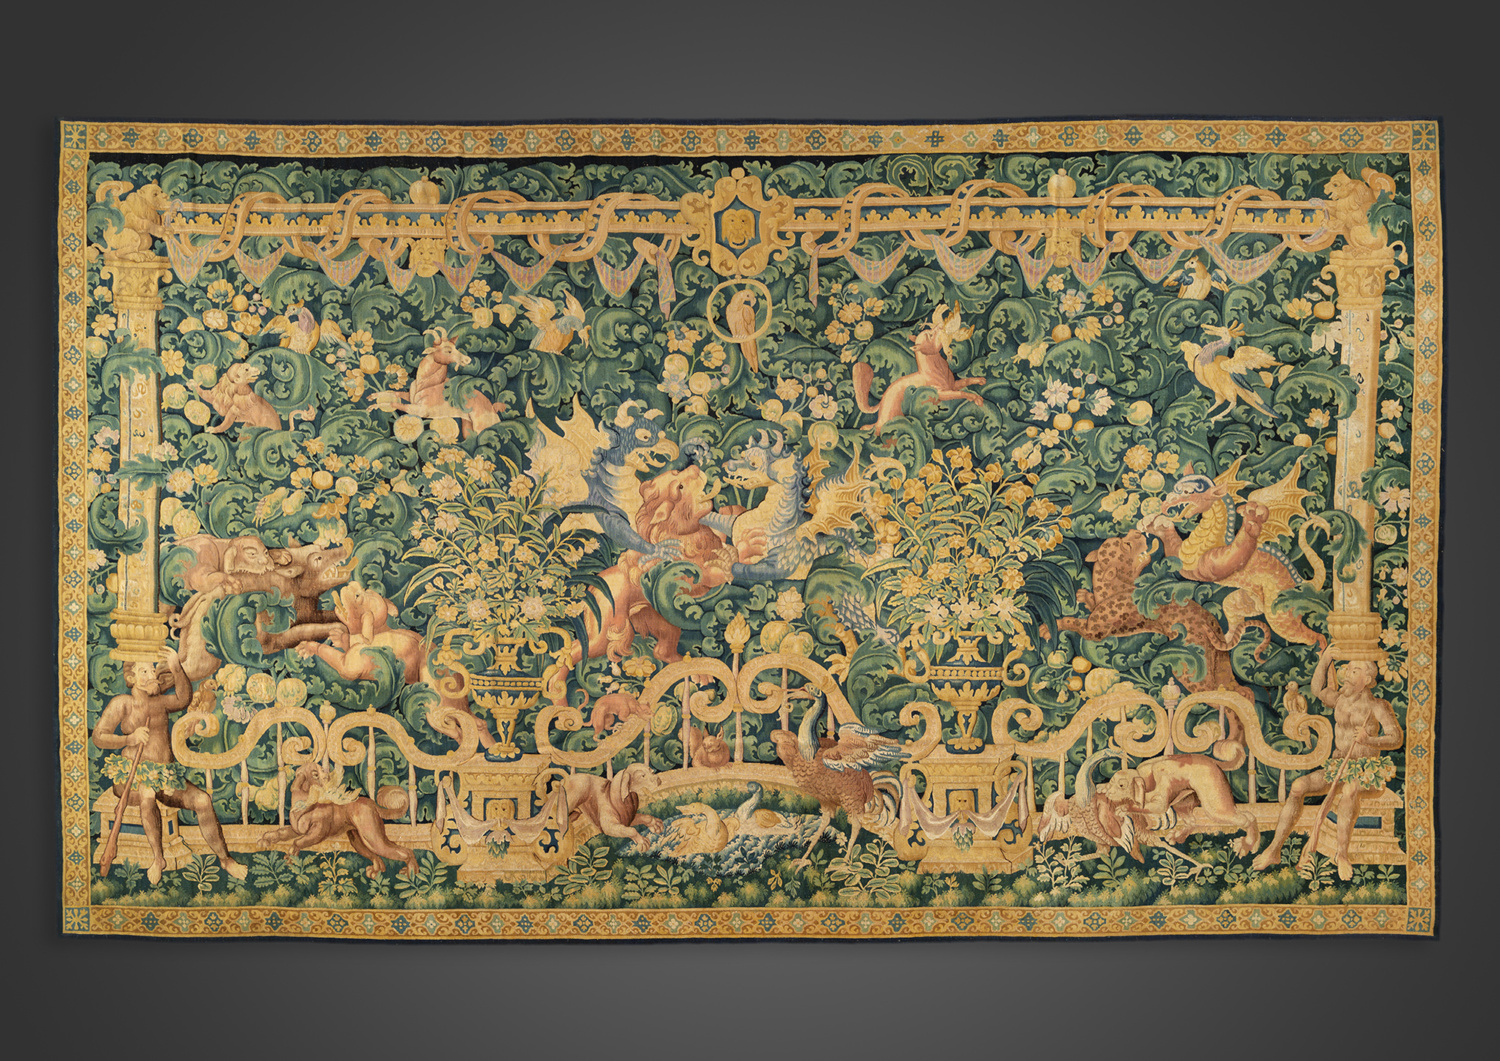 Tapestry with a “feuilles d’aristoloche” design - Galerie Kugel